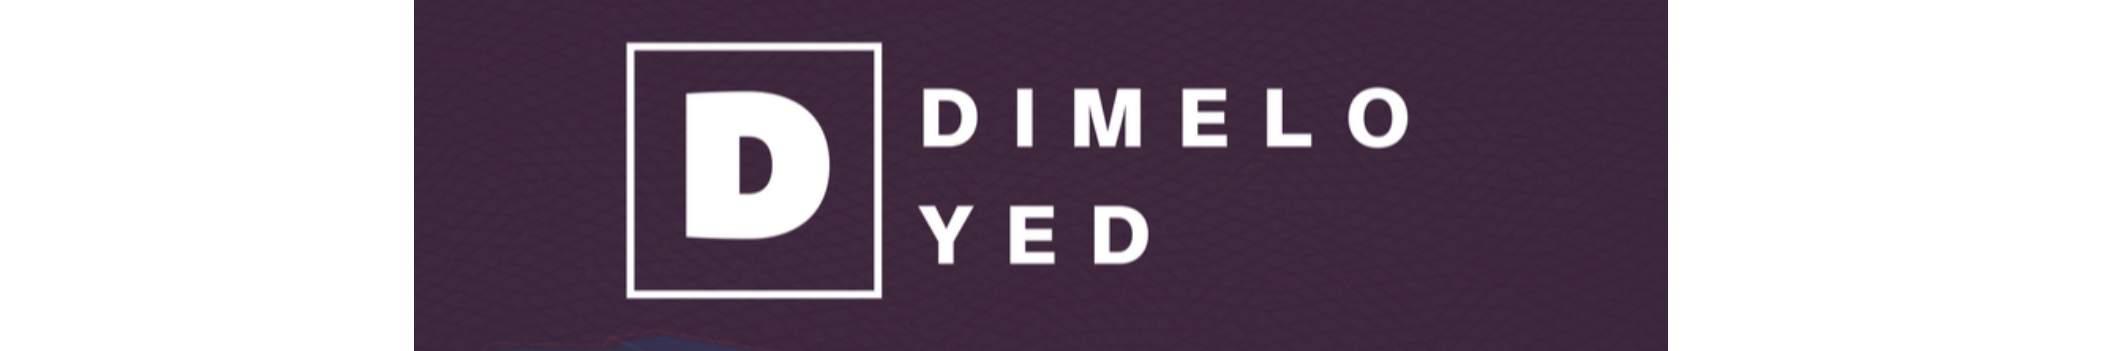 Dimelo Yed Official